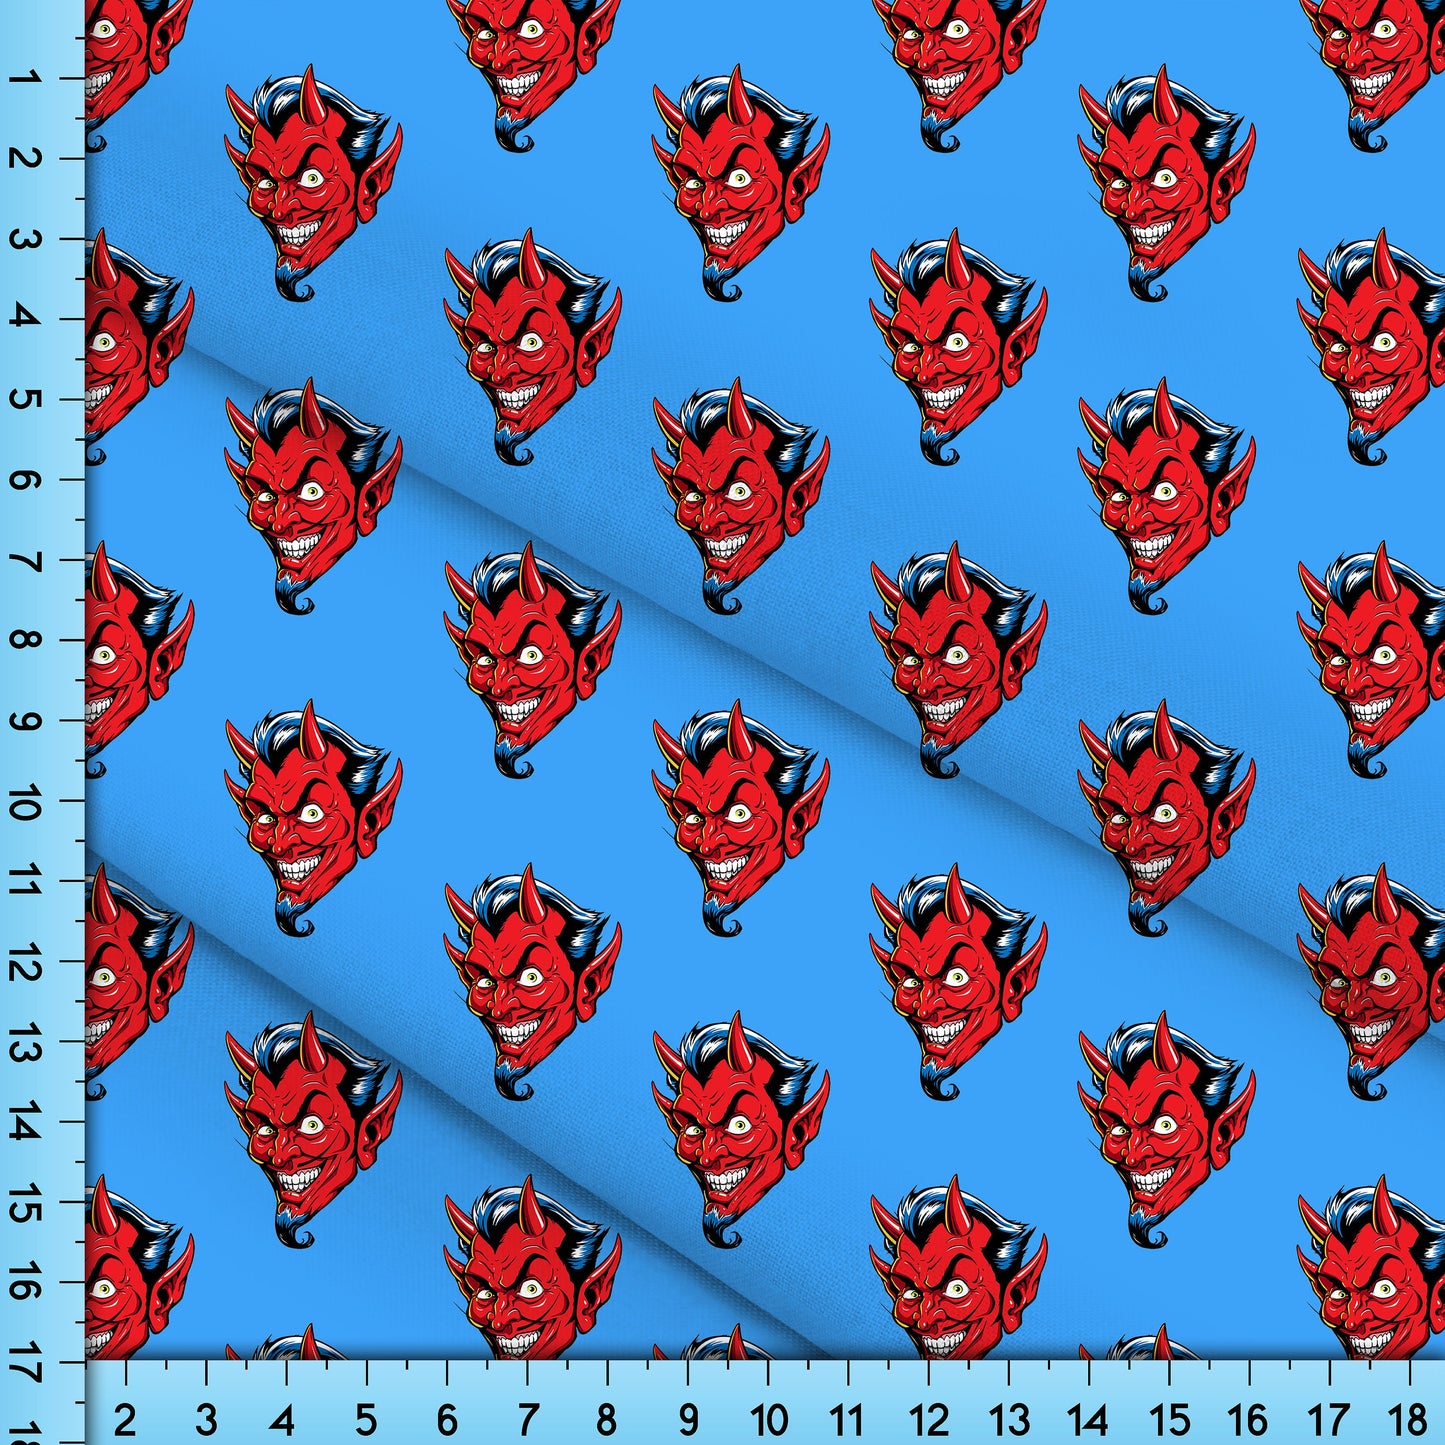 Red Devil on Blue Fabric Pattern, Novelty Design Printed By the Yard for Crafts, Shirts, Masks